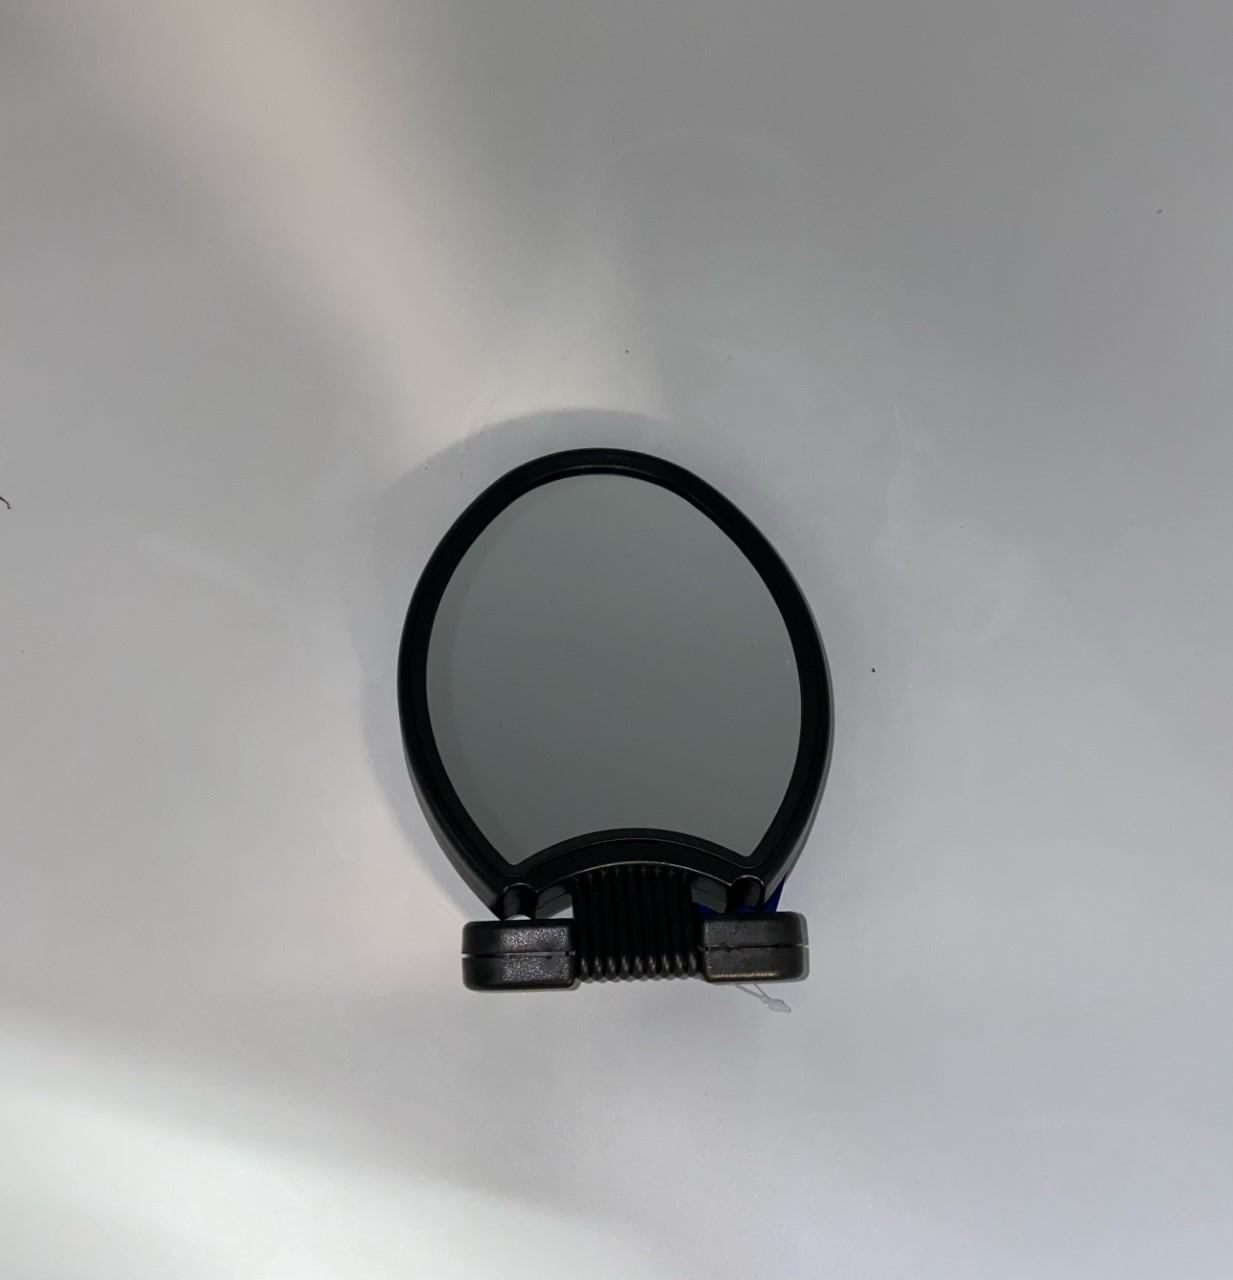 NEW STOCK- Mirror with Stand, Bathroom Accessories, Home Accessories- Wholesale Stock Only